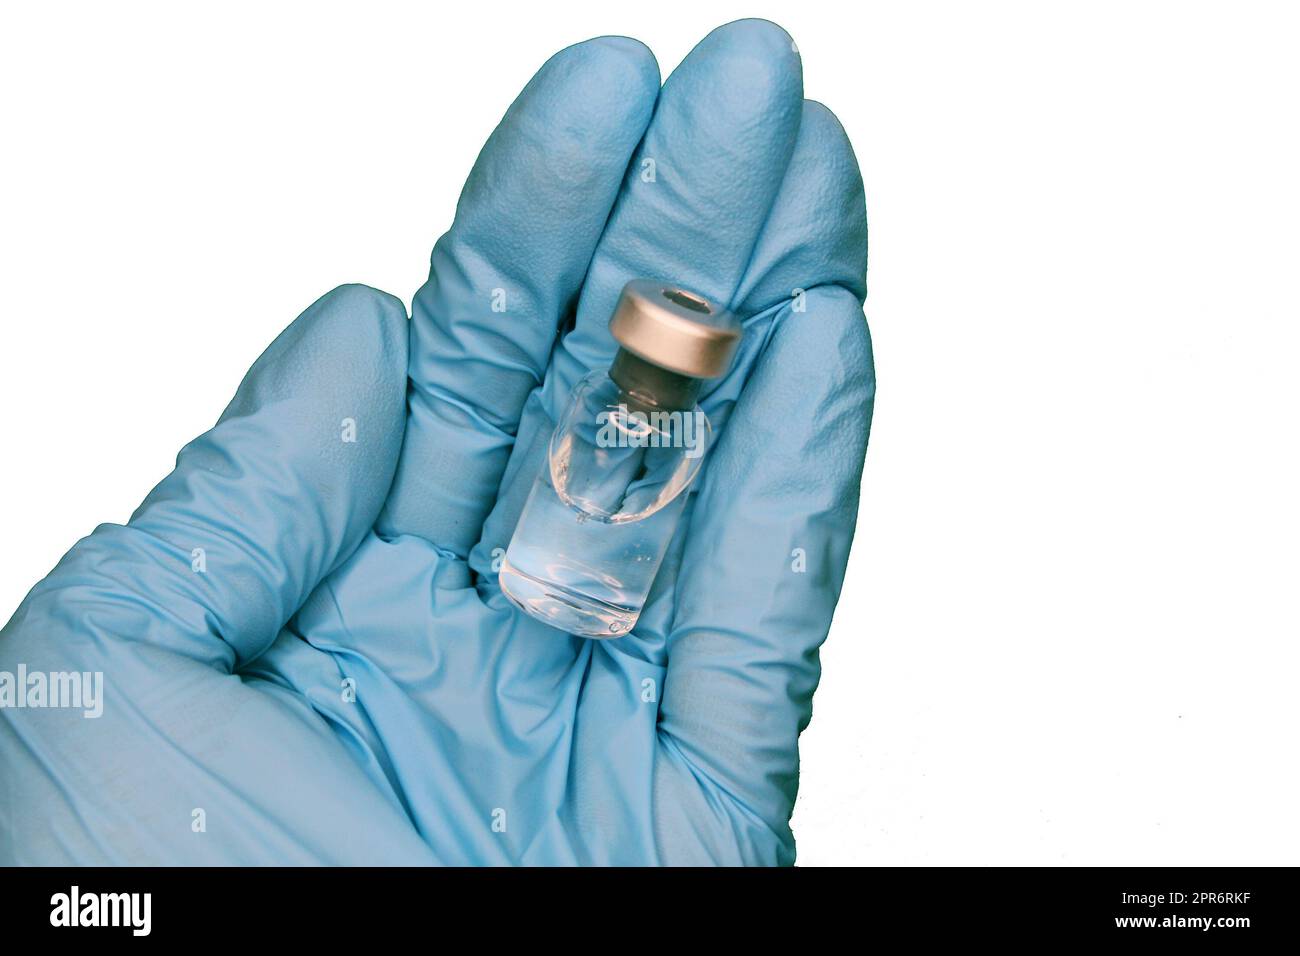 A hand in a blue medical glove close-up holding a vaccine against a light background. The concept of the fight against Covid19. Stock Photo